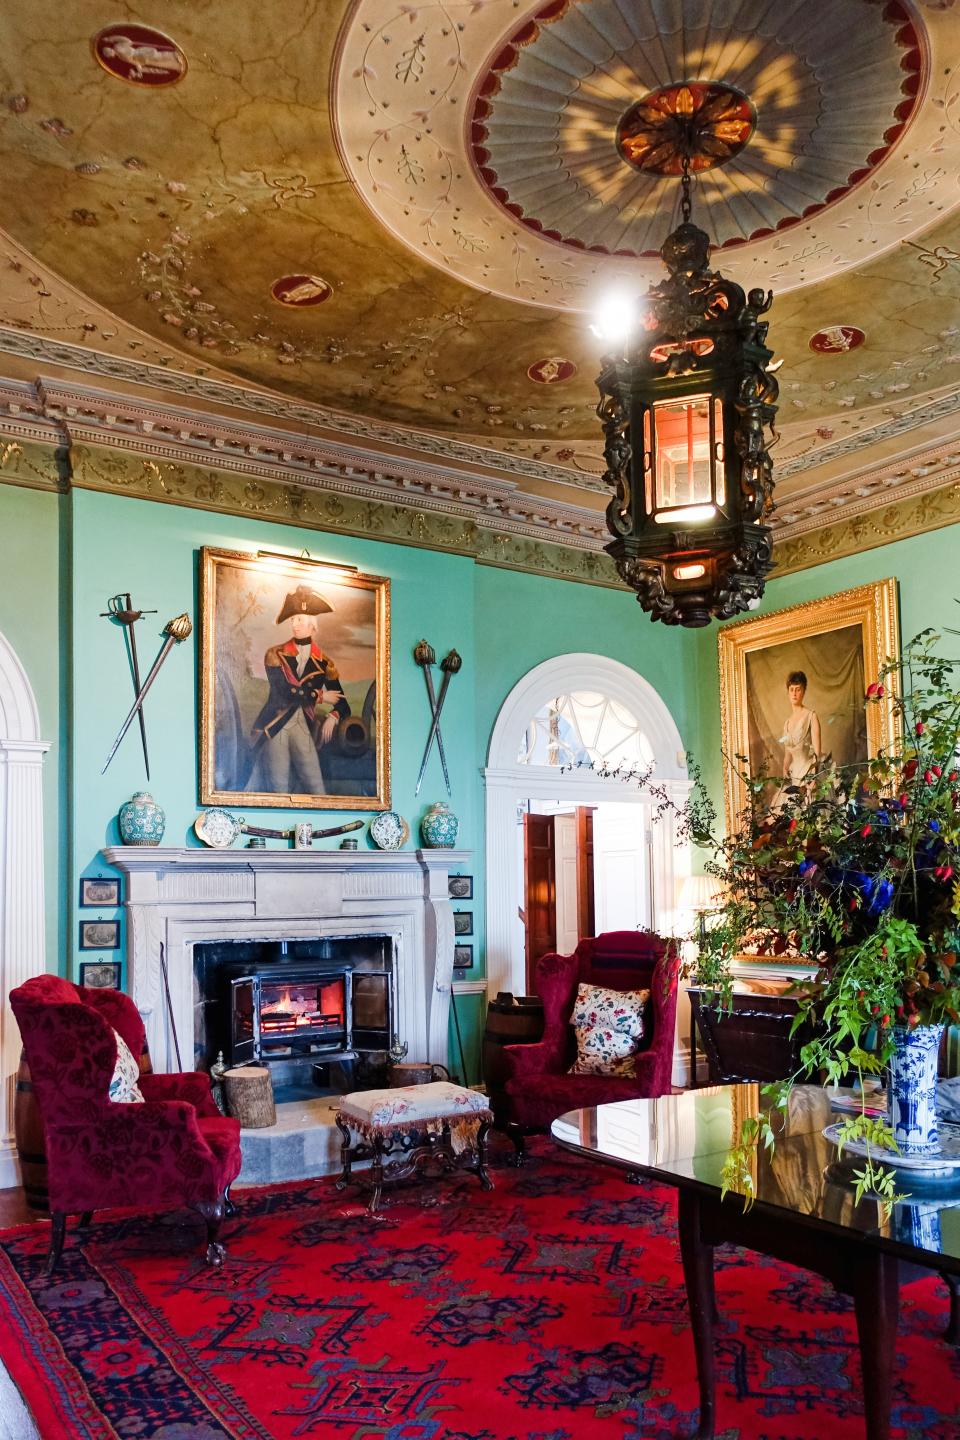 The mint-colored hall is furnished with historic objects that resonate with the mansion's character.